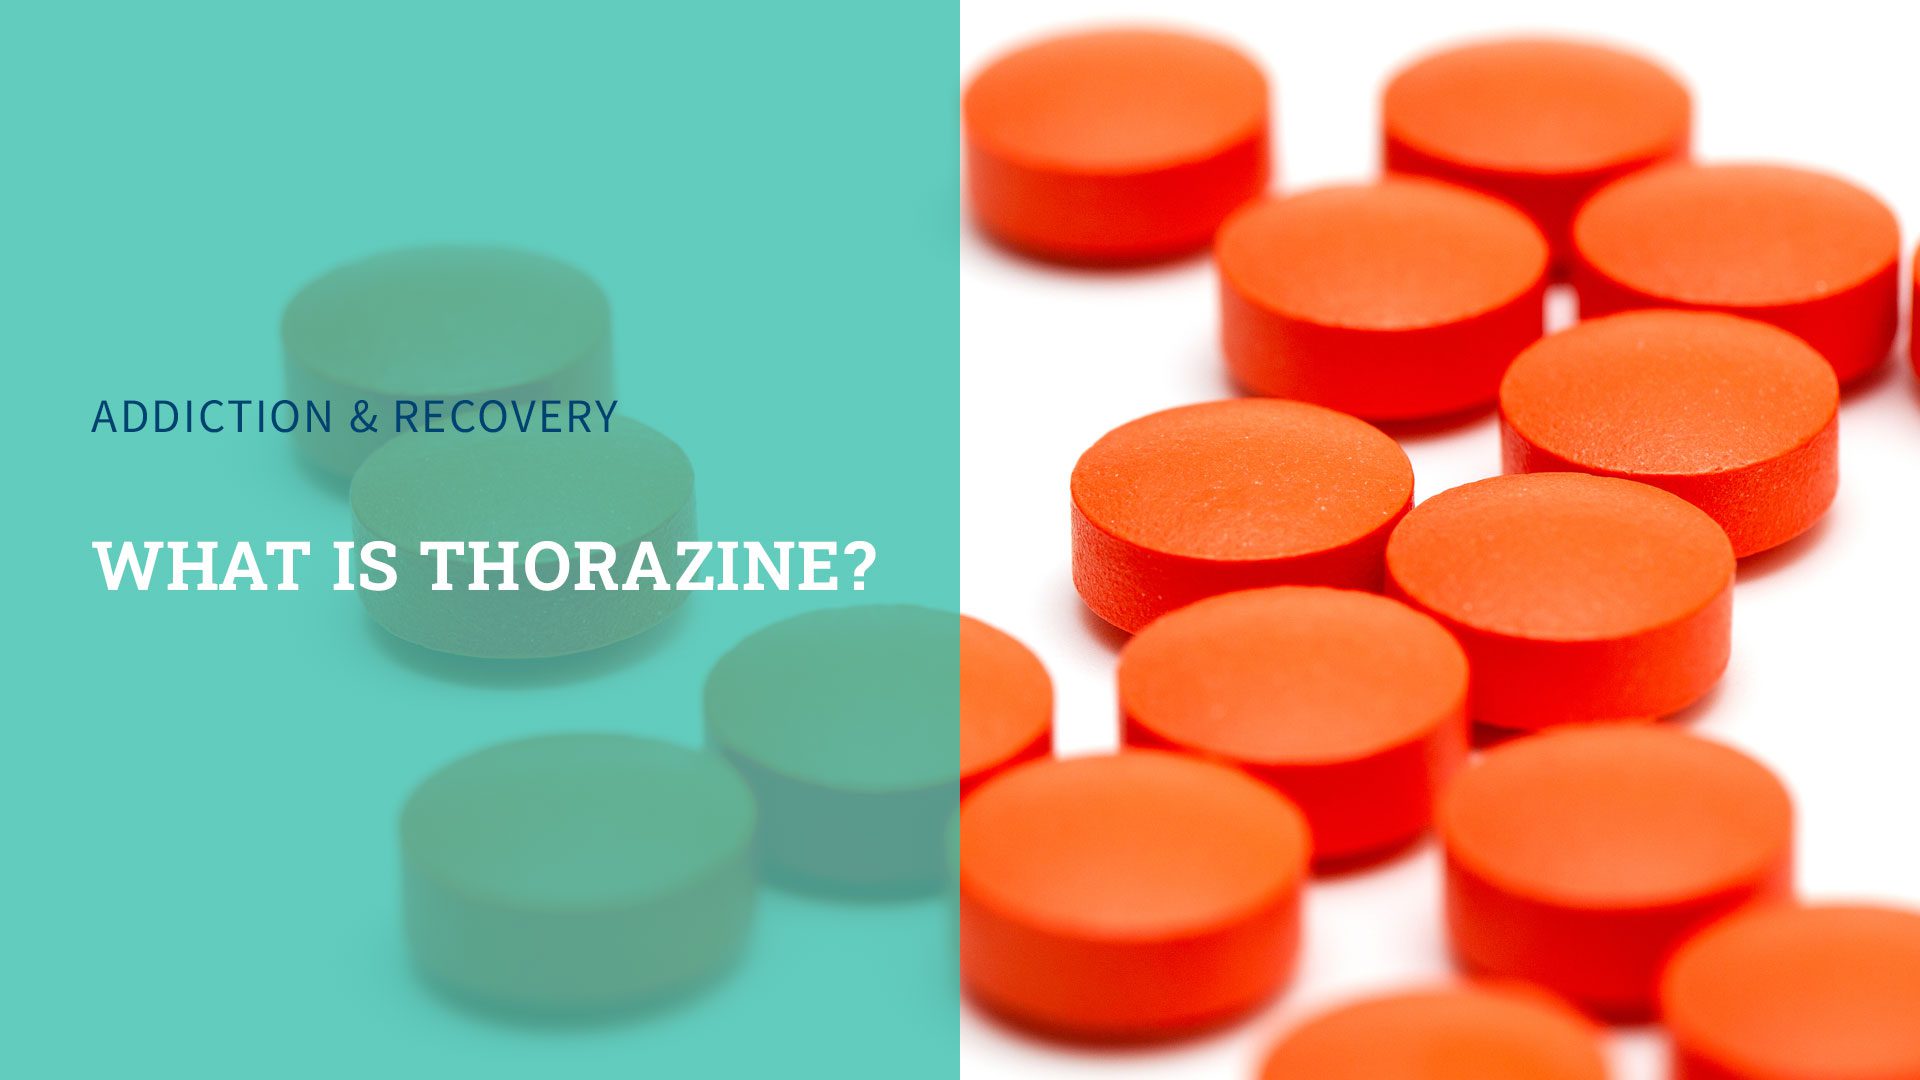 What is Thorazine?